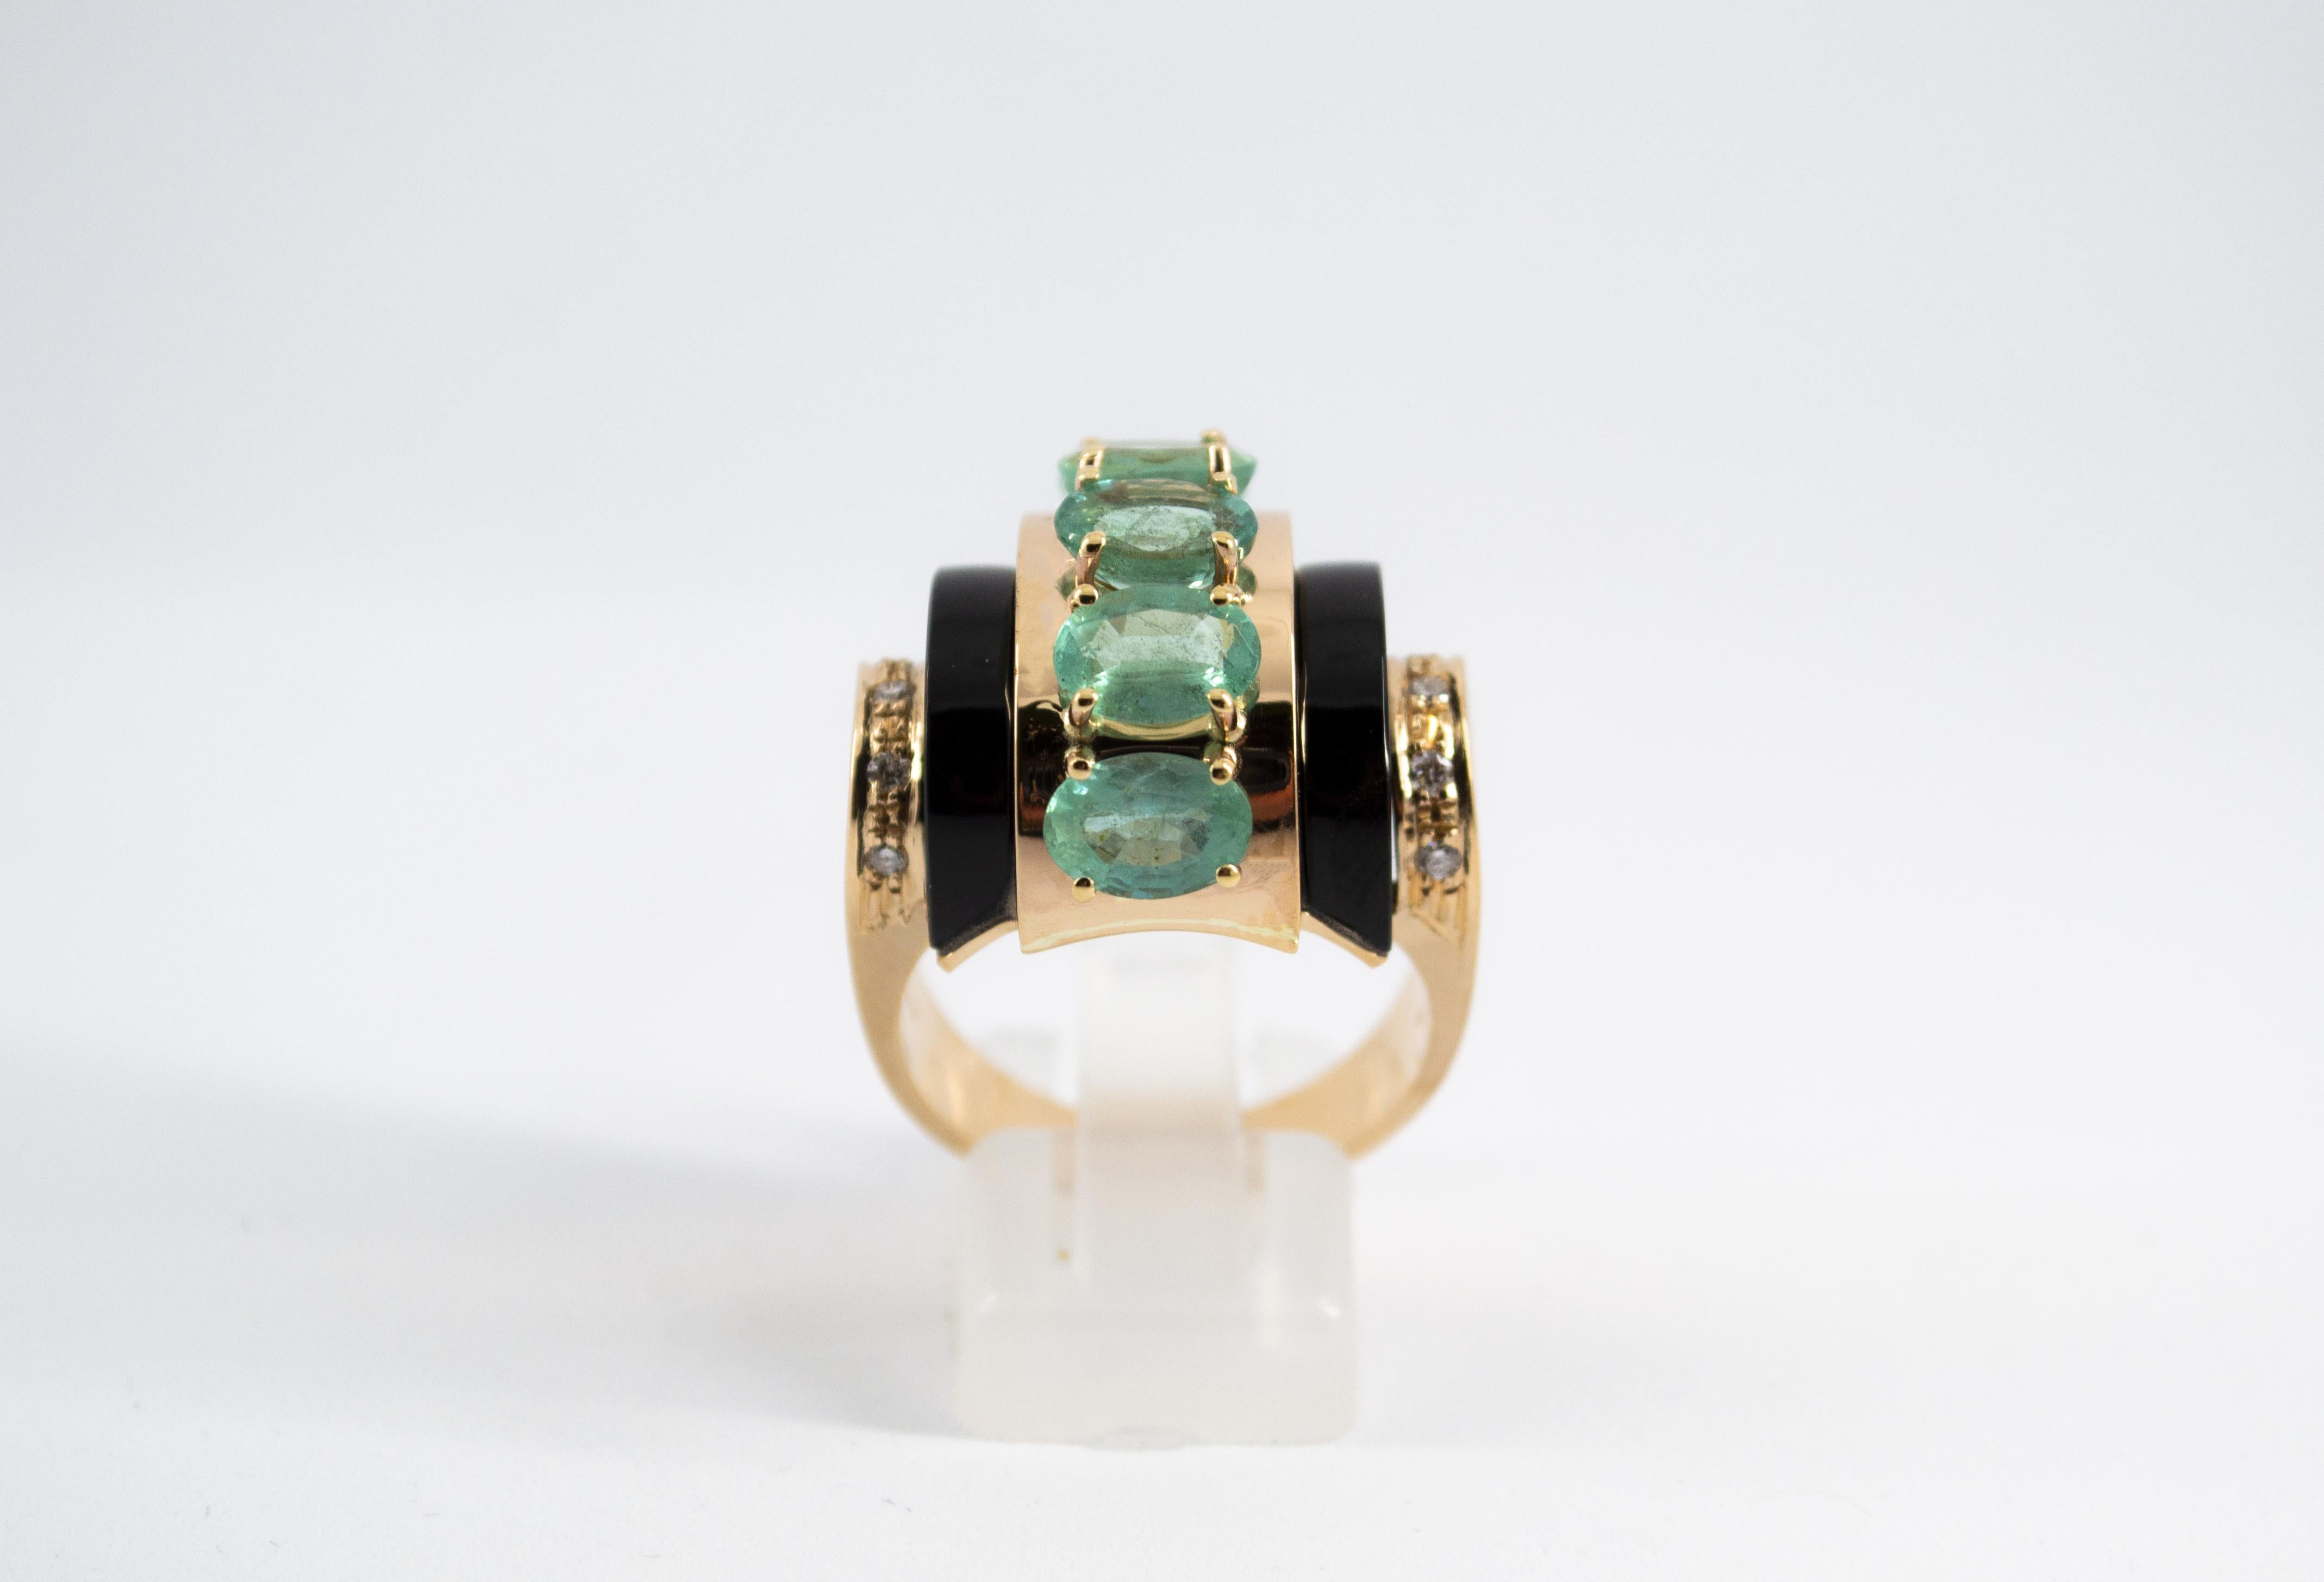 This Ring is made of 14K Yellow Gold.
This Ring has 0.15 Carats of White Diamonds.
This Ring has 5.00 Carats of Emeralds.
This Ring has Onyx.
This Ring is available also with Rubies.
Size ITA: 20 USA: 9 1/4
We're a workshop so every piece is